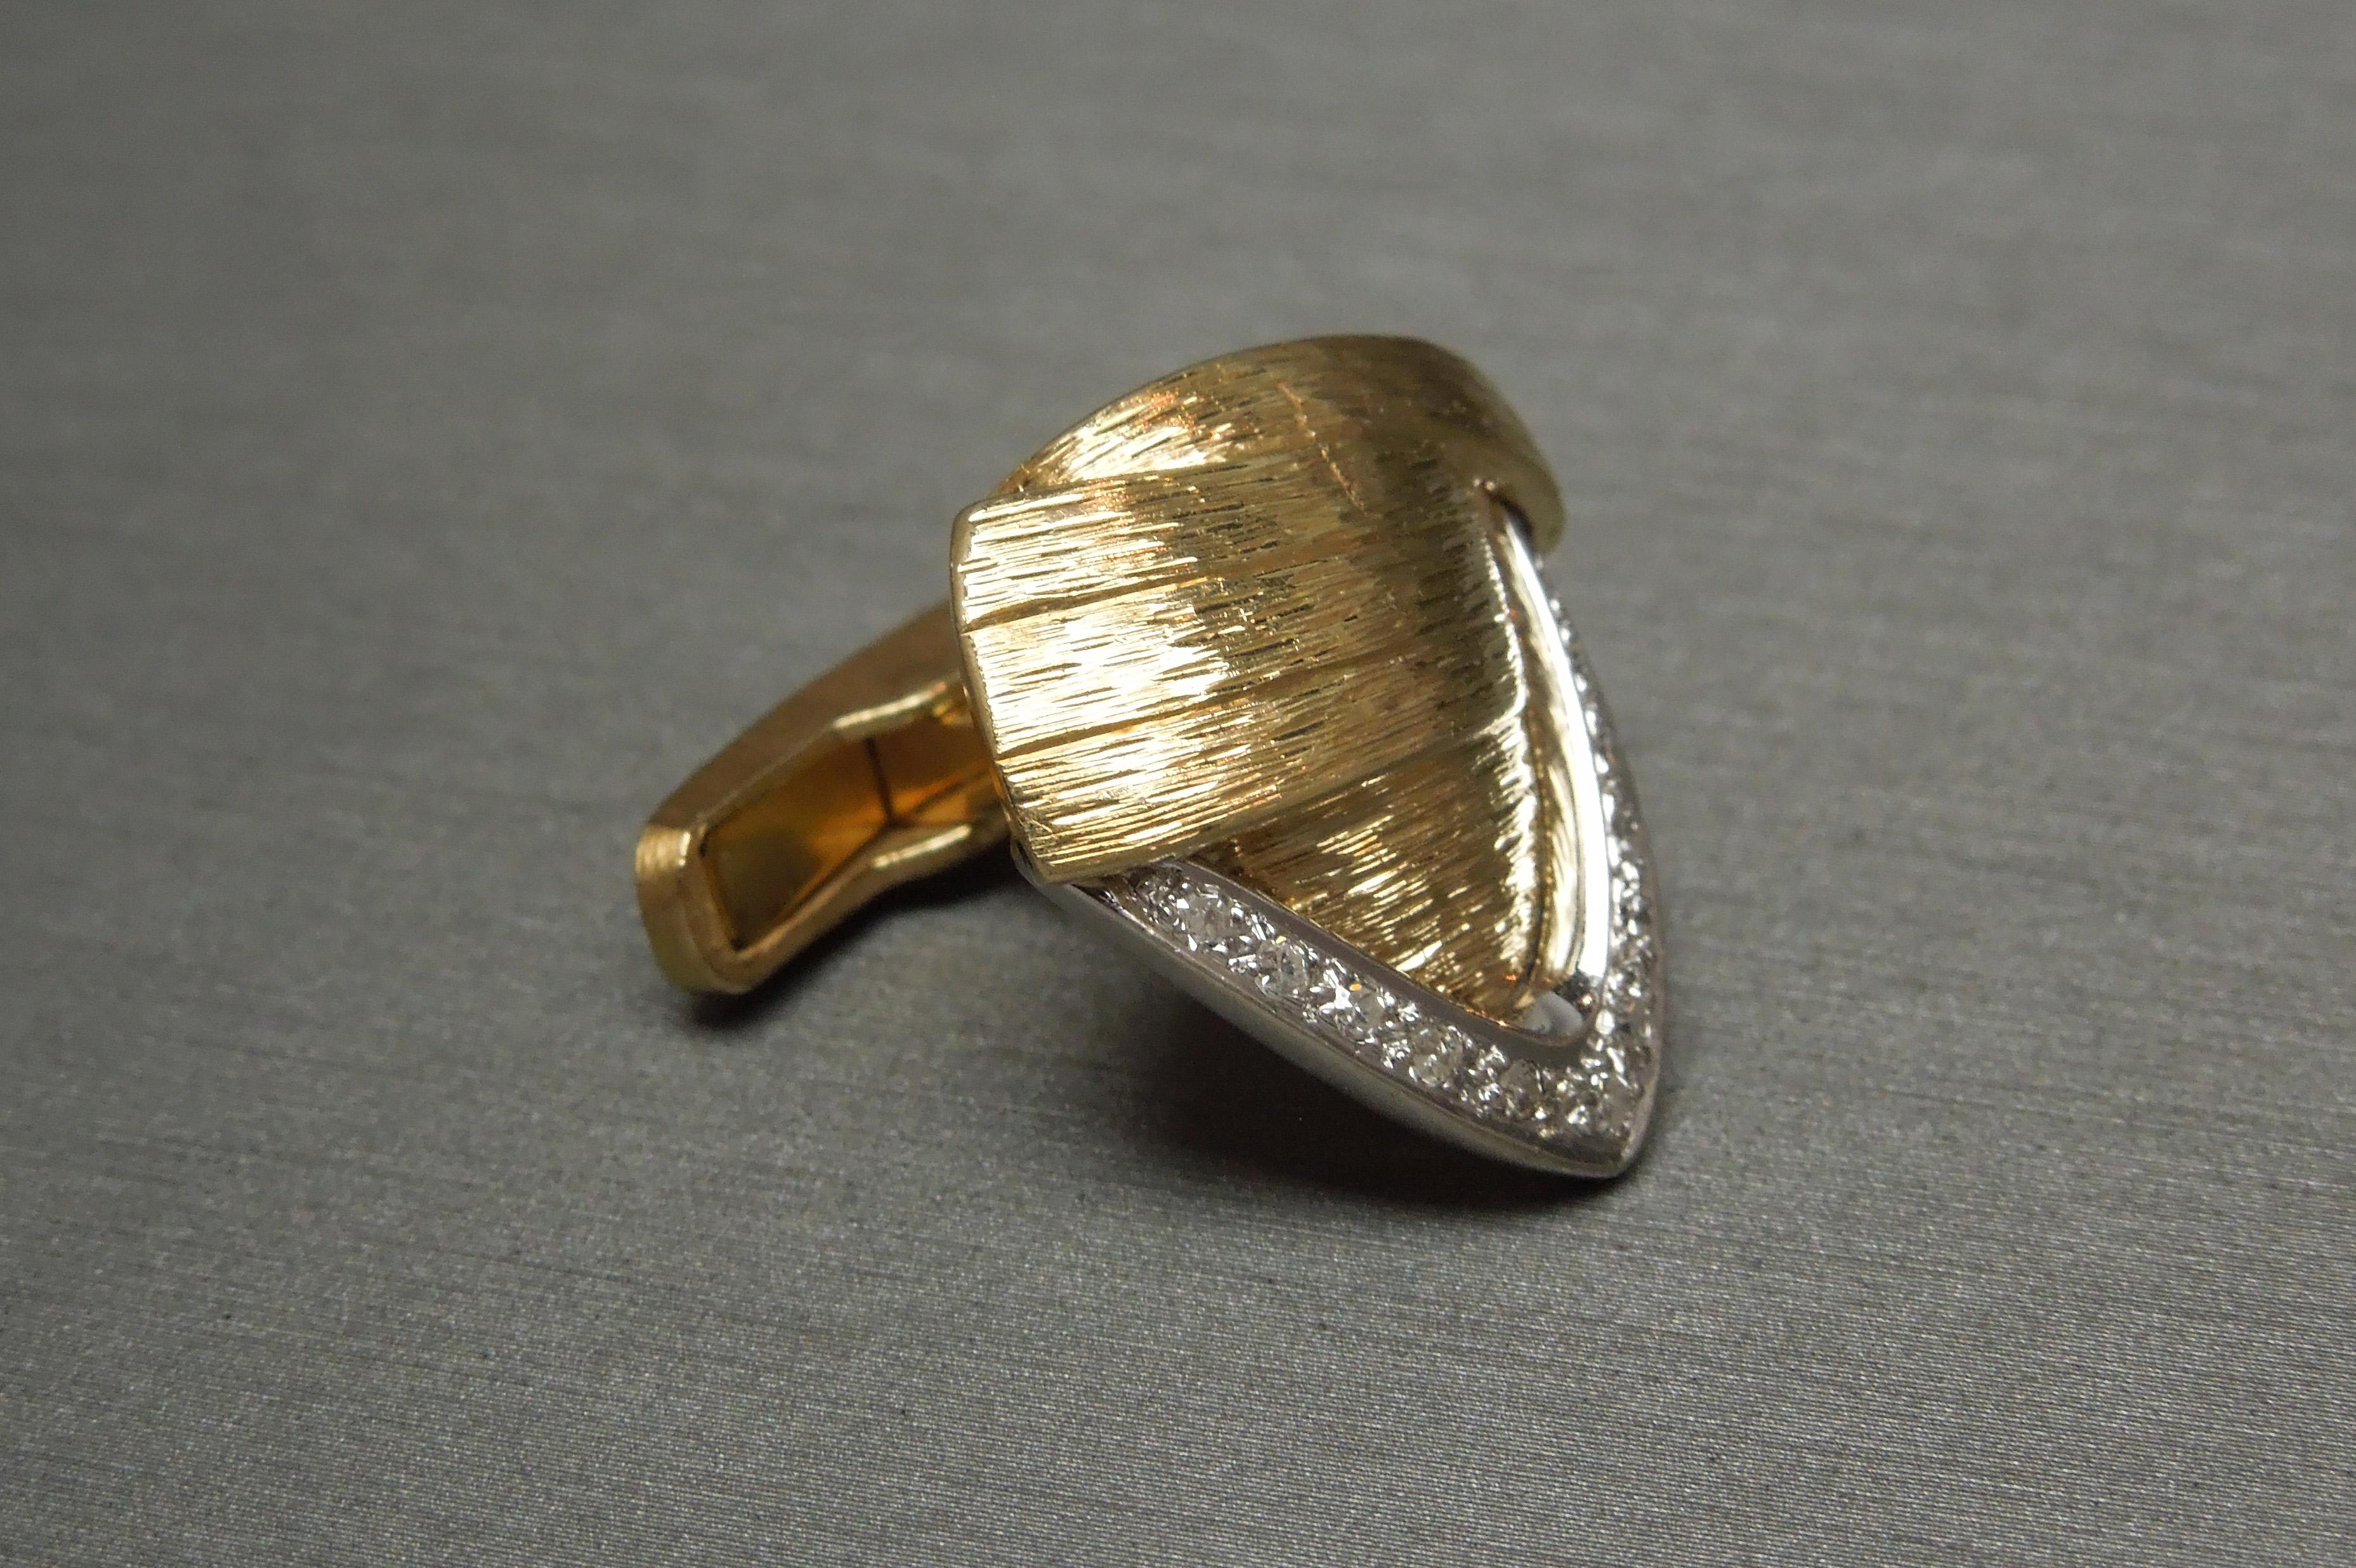 These Unisex 14KT Gold Diamond Cuff Links are constructed in a Retro triangular cuffed design, with a textured detail throughout. Predominantly Yellow Gold with White Gold sections containing a total of 0.80 carats of Nearly Colorless Nearly